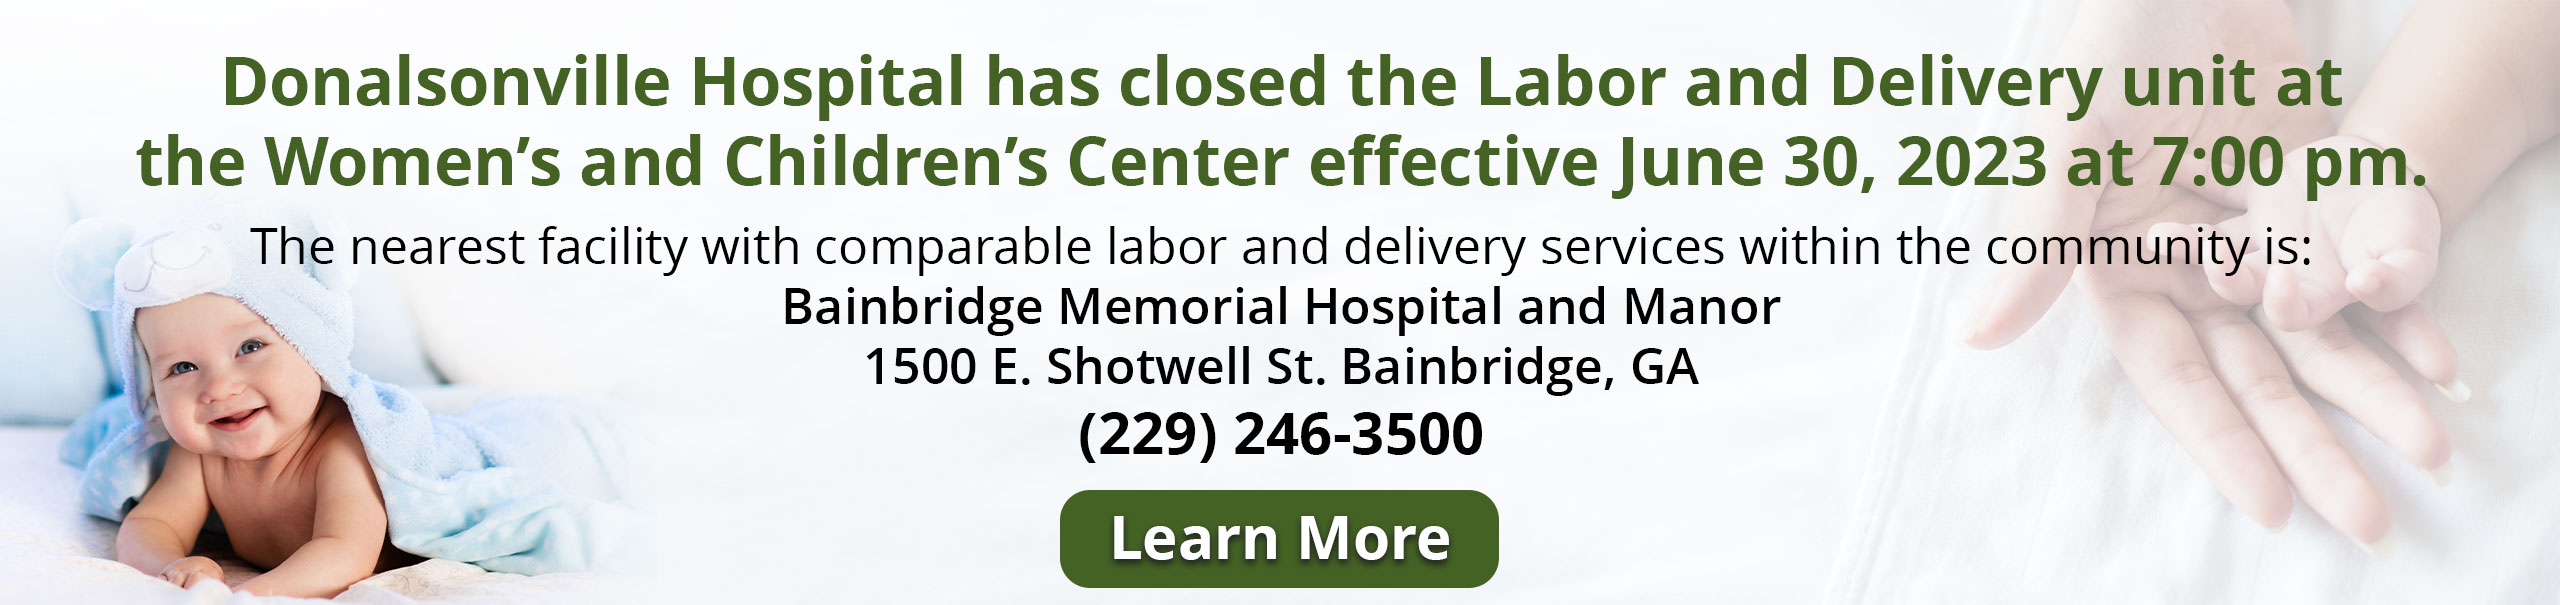 Donalsonville Hospital has CLOSED the Labor and Delivery unit at the Women’s and Children’s Center effective June 30, 2023 at 7:00 pm.

The nearest facility with comparable labor and delivery services within the community is:
Bainbridge Memorial Hospital and Manor
1500 E. Shotwell St. Bainbridge, GA
(229) 246-3500

Learn More by clicking here